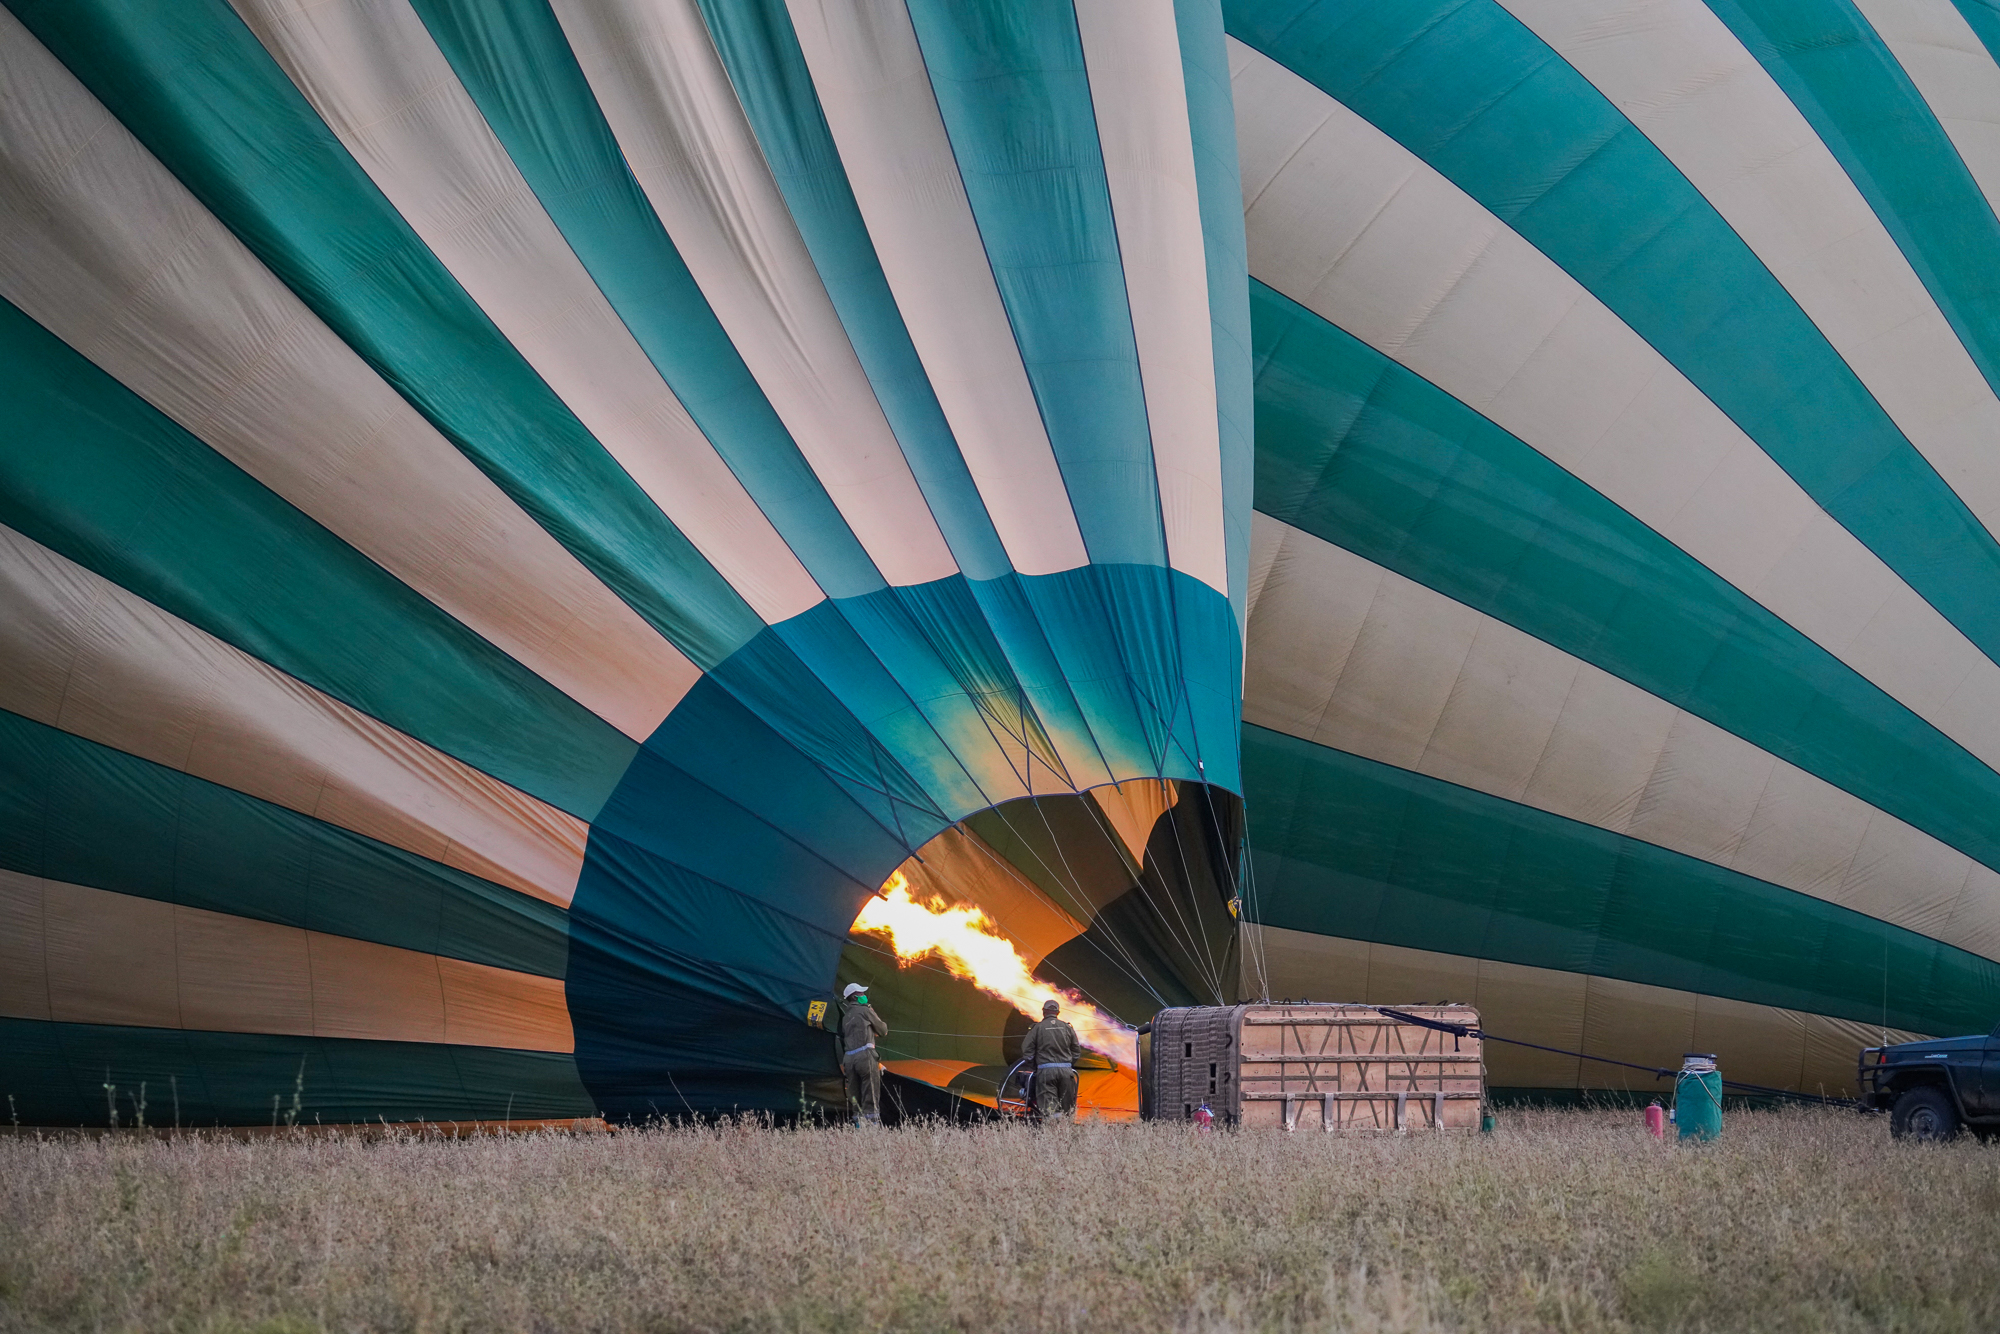 Hot Air Balloon Filling Up in the Serengeti